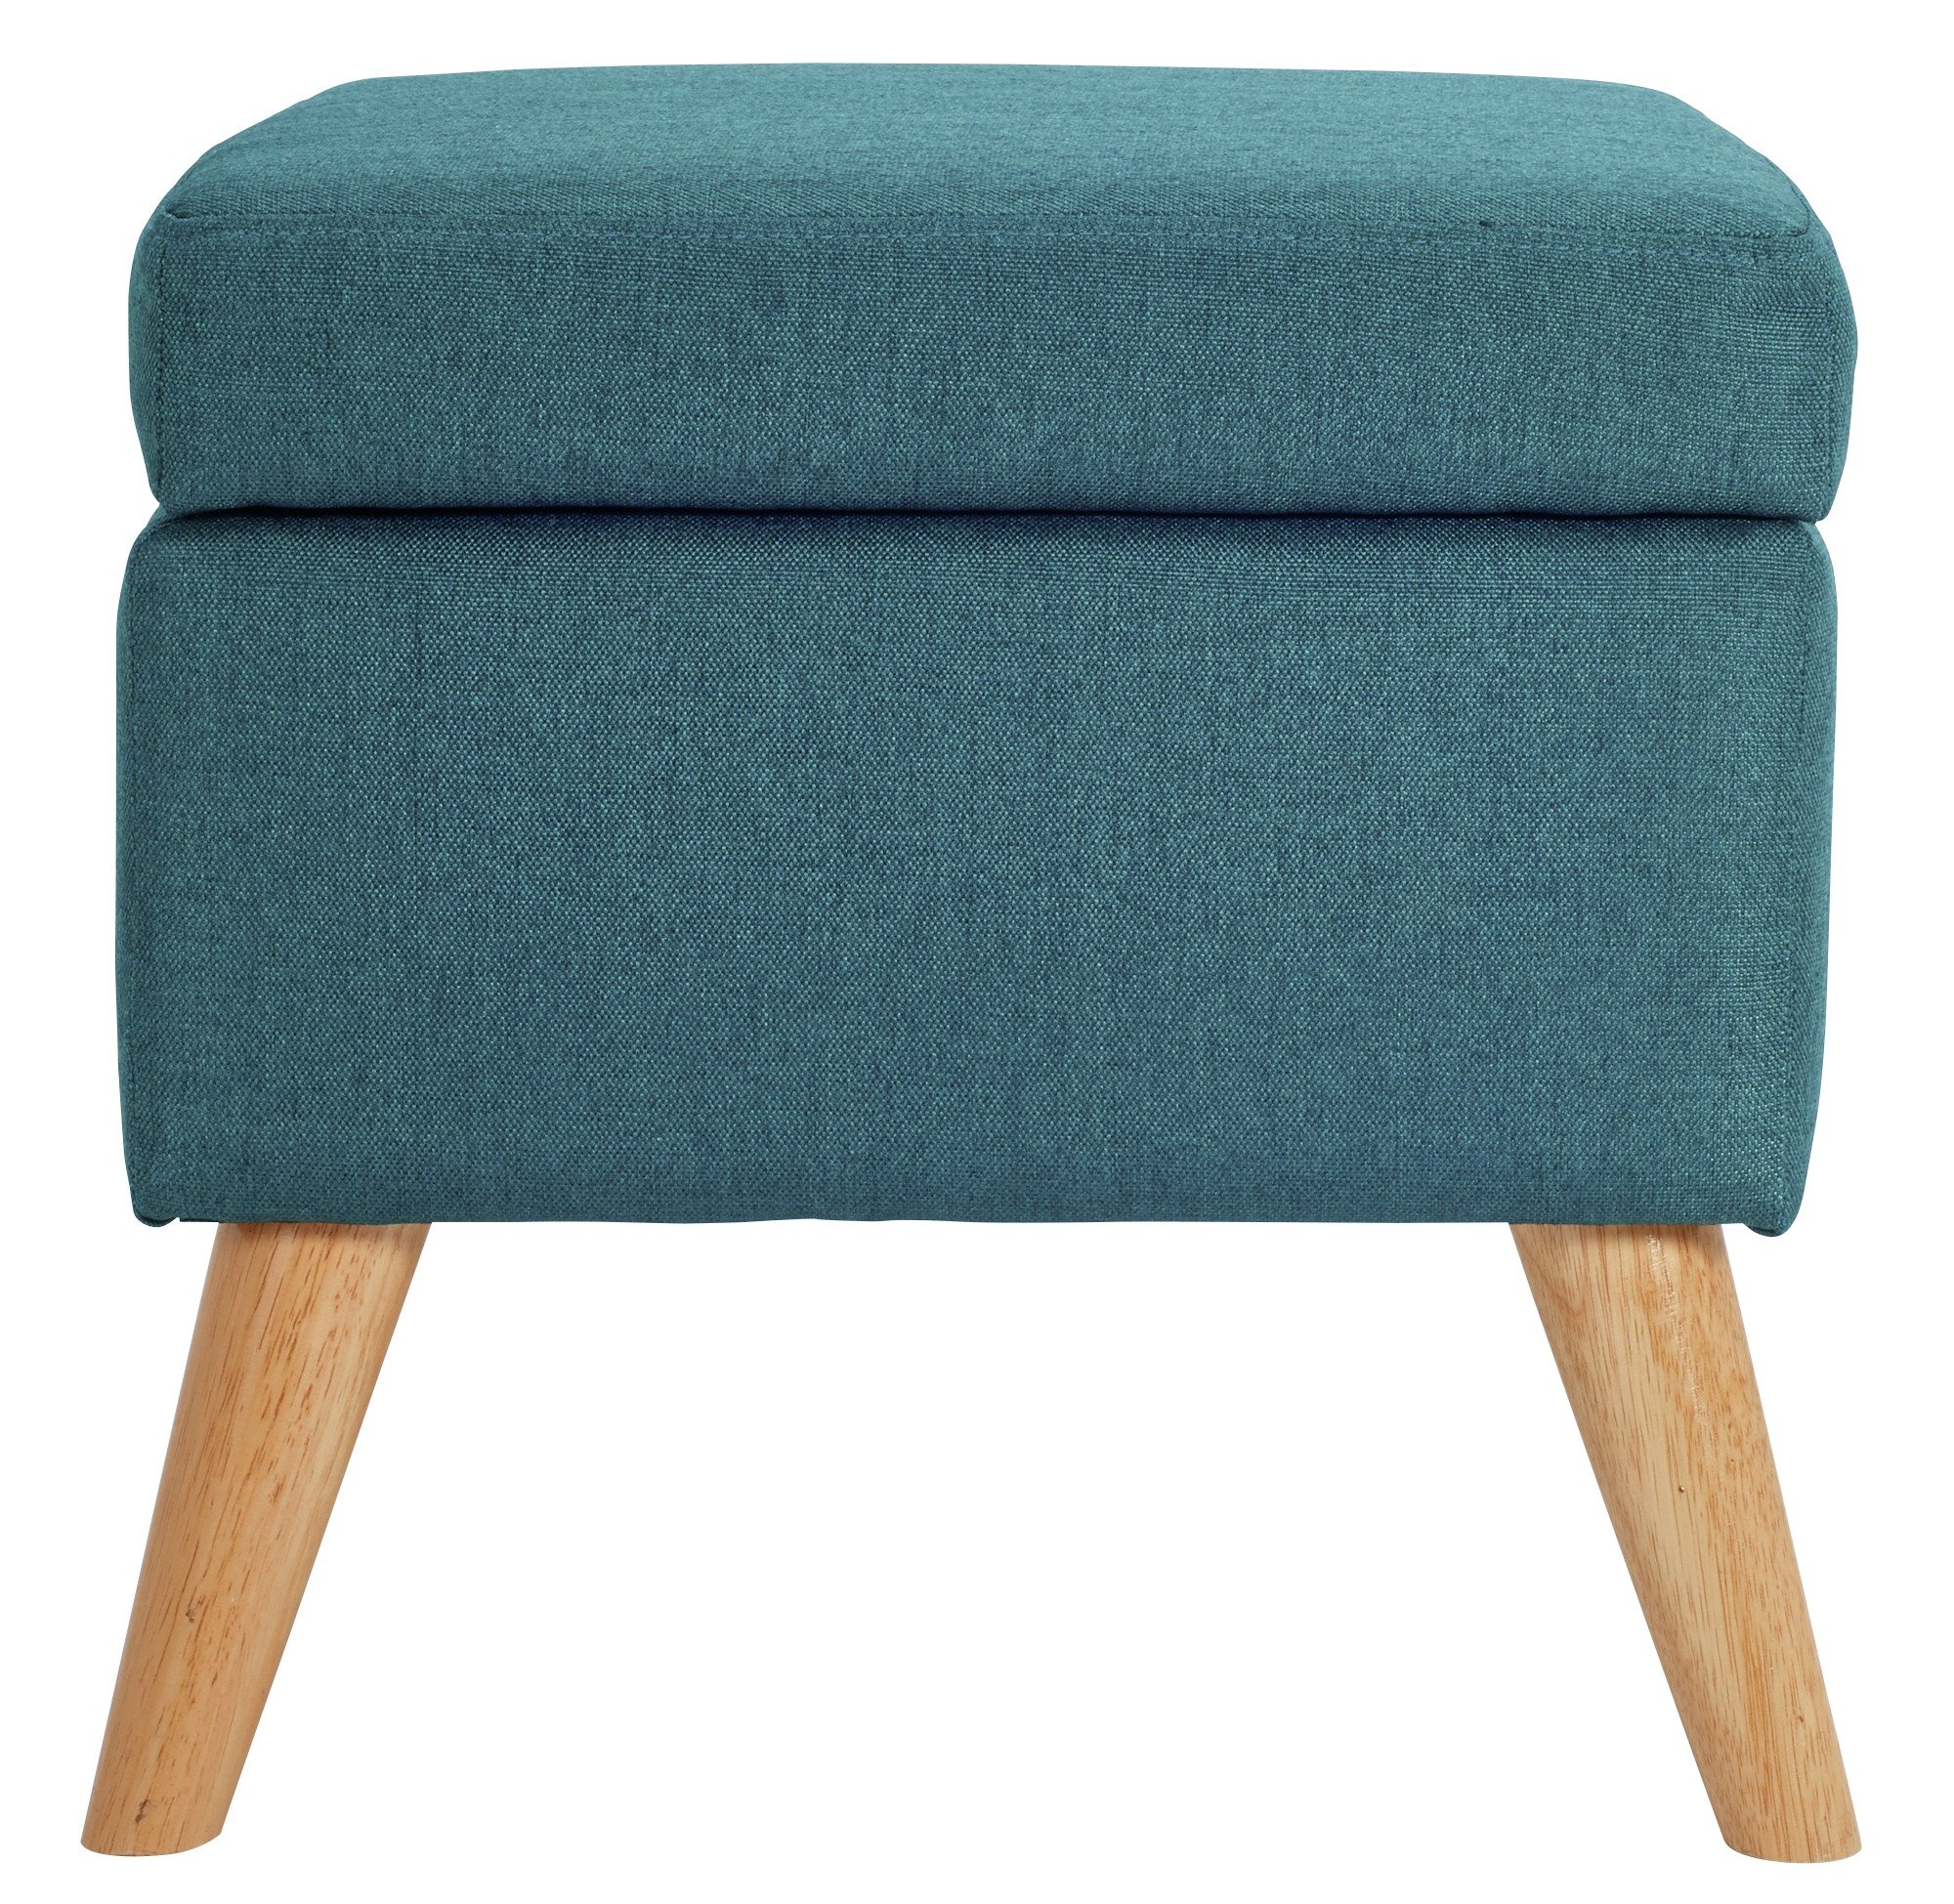 Argos Home Lexie Fabric Storage Footstool review